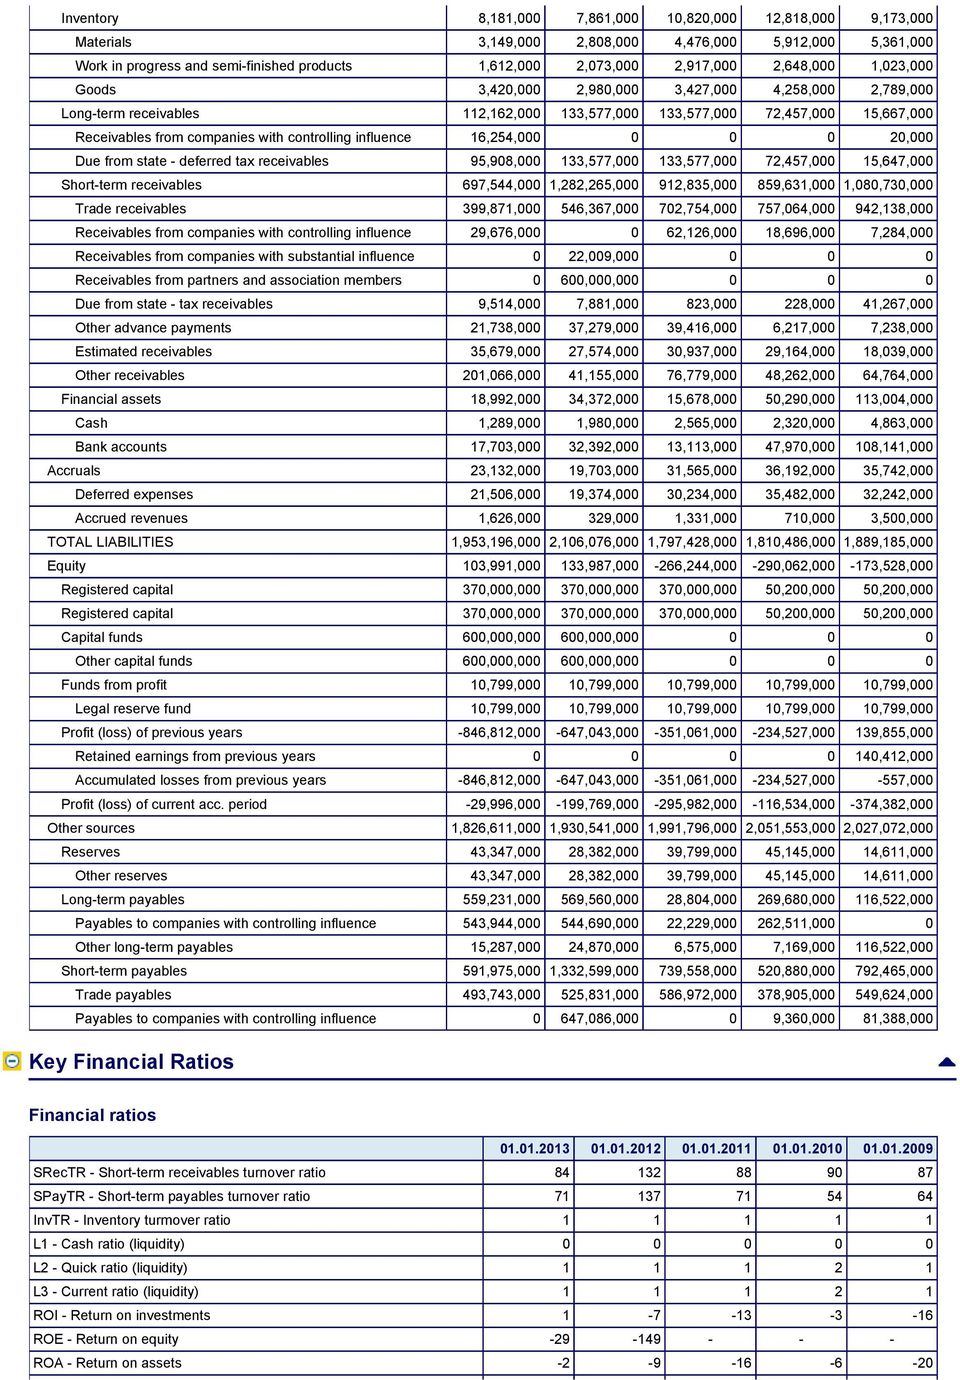 influence 16,254,000 0 0 0 20,000 Due from state - deferred tax receivables 95,908,000 133,577,000 133,577,000 72,457,000 15,647,000 Short-term receivables 697,544,000 1,282,265,000 912,835,000